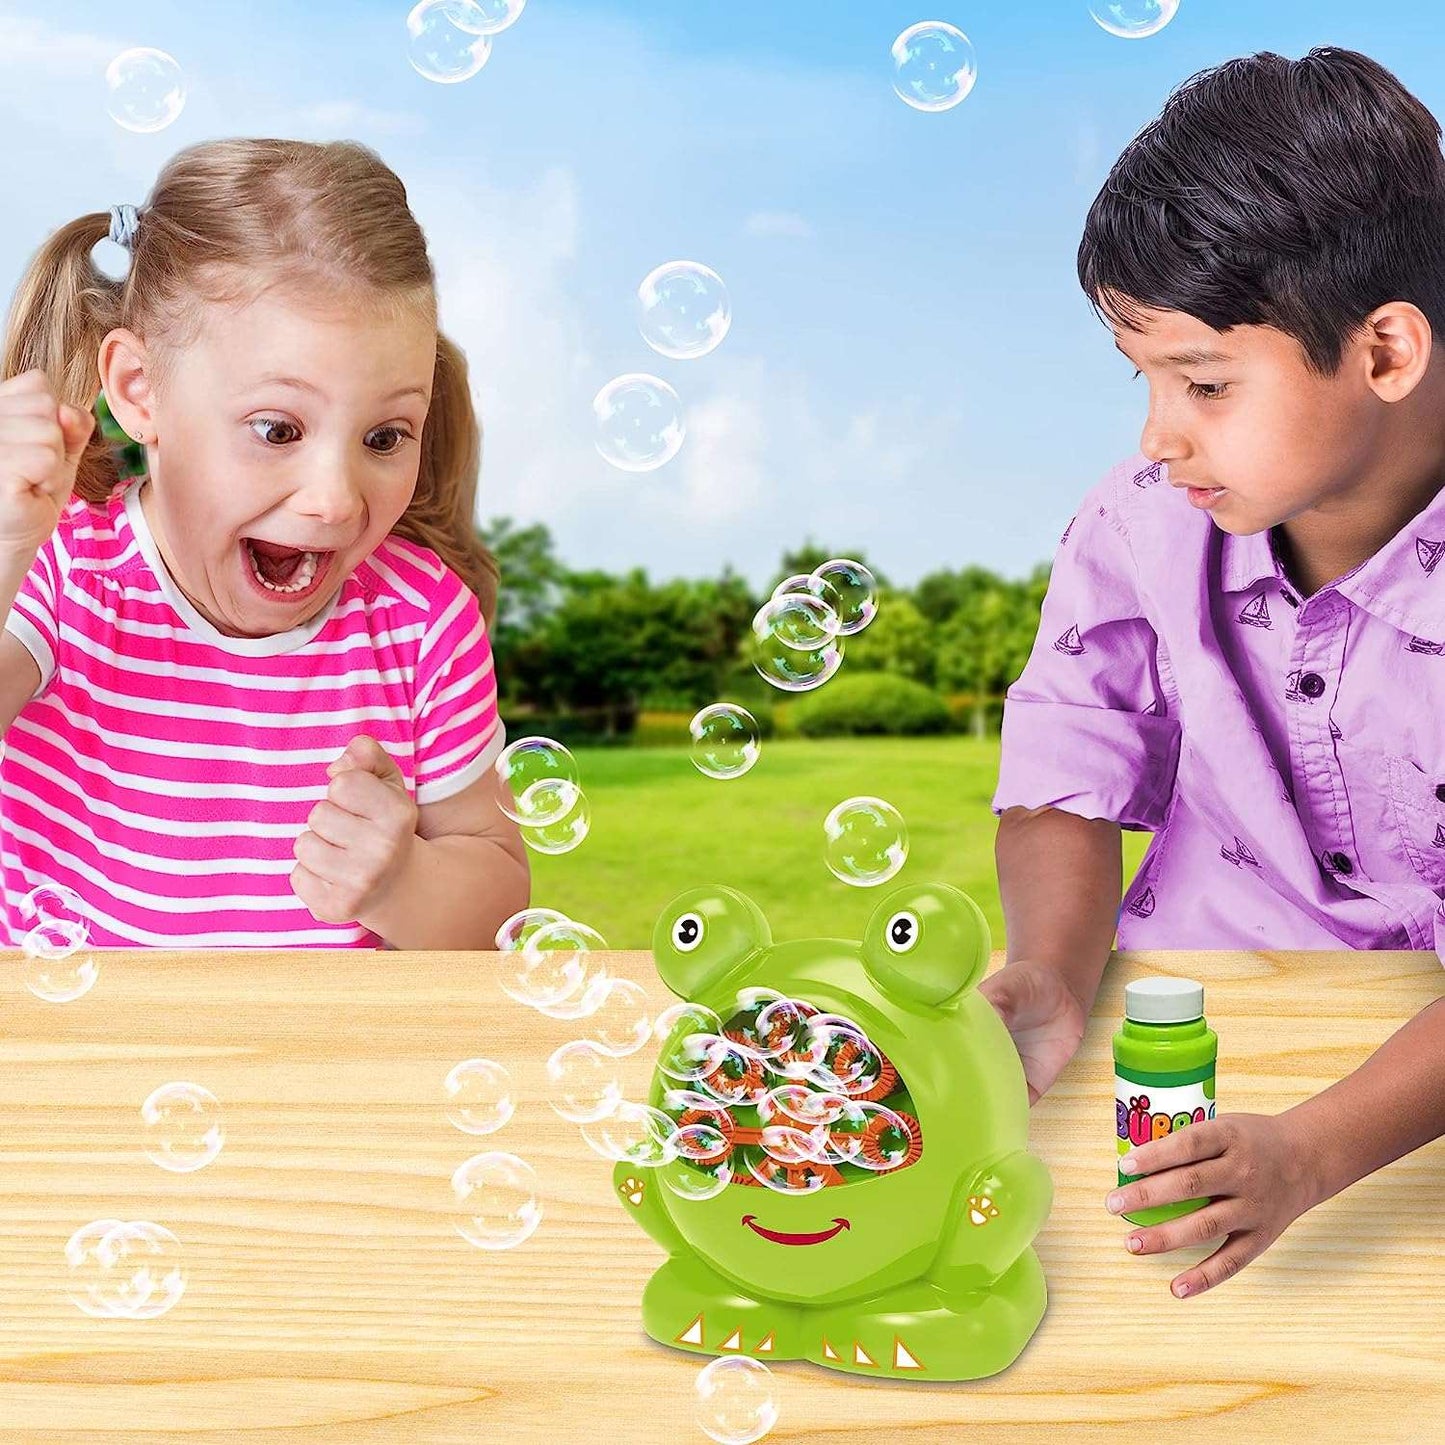 ArtCreativity Frog Bubble Machine Set for Kids - 2 Pack - Includes 2 Bubbles Blowing Toys and 2 Bottles of Solution - Fun Summer Outdoor or Party Activity - Best Gift for Boys, Girls, and Toddlers - Hatke